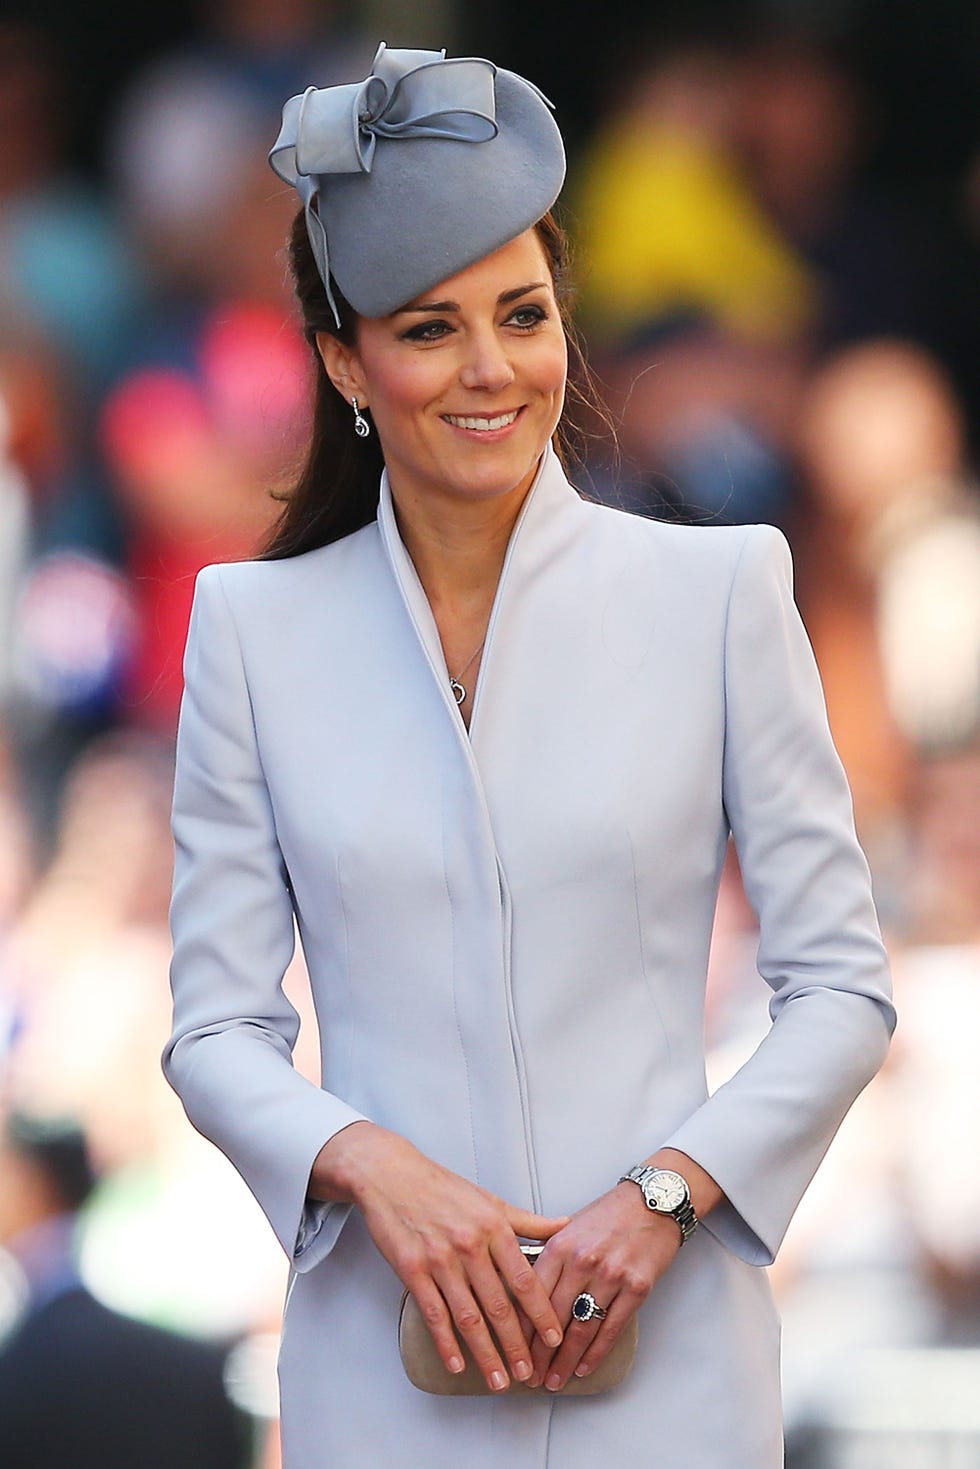 sydney, australia   april 20  catherine, duchess of cambridge arrives at st andrews cathedral for easter sunday service on april 20, 2014 in sydney, australia the duke and duchess of cambridge are on a three week tour of australia and new zealand, the first official trip overseas with their son, prince george of cambridge  photo by brendon thornegetty images